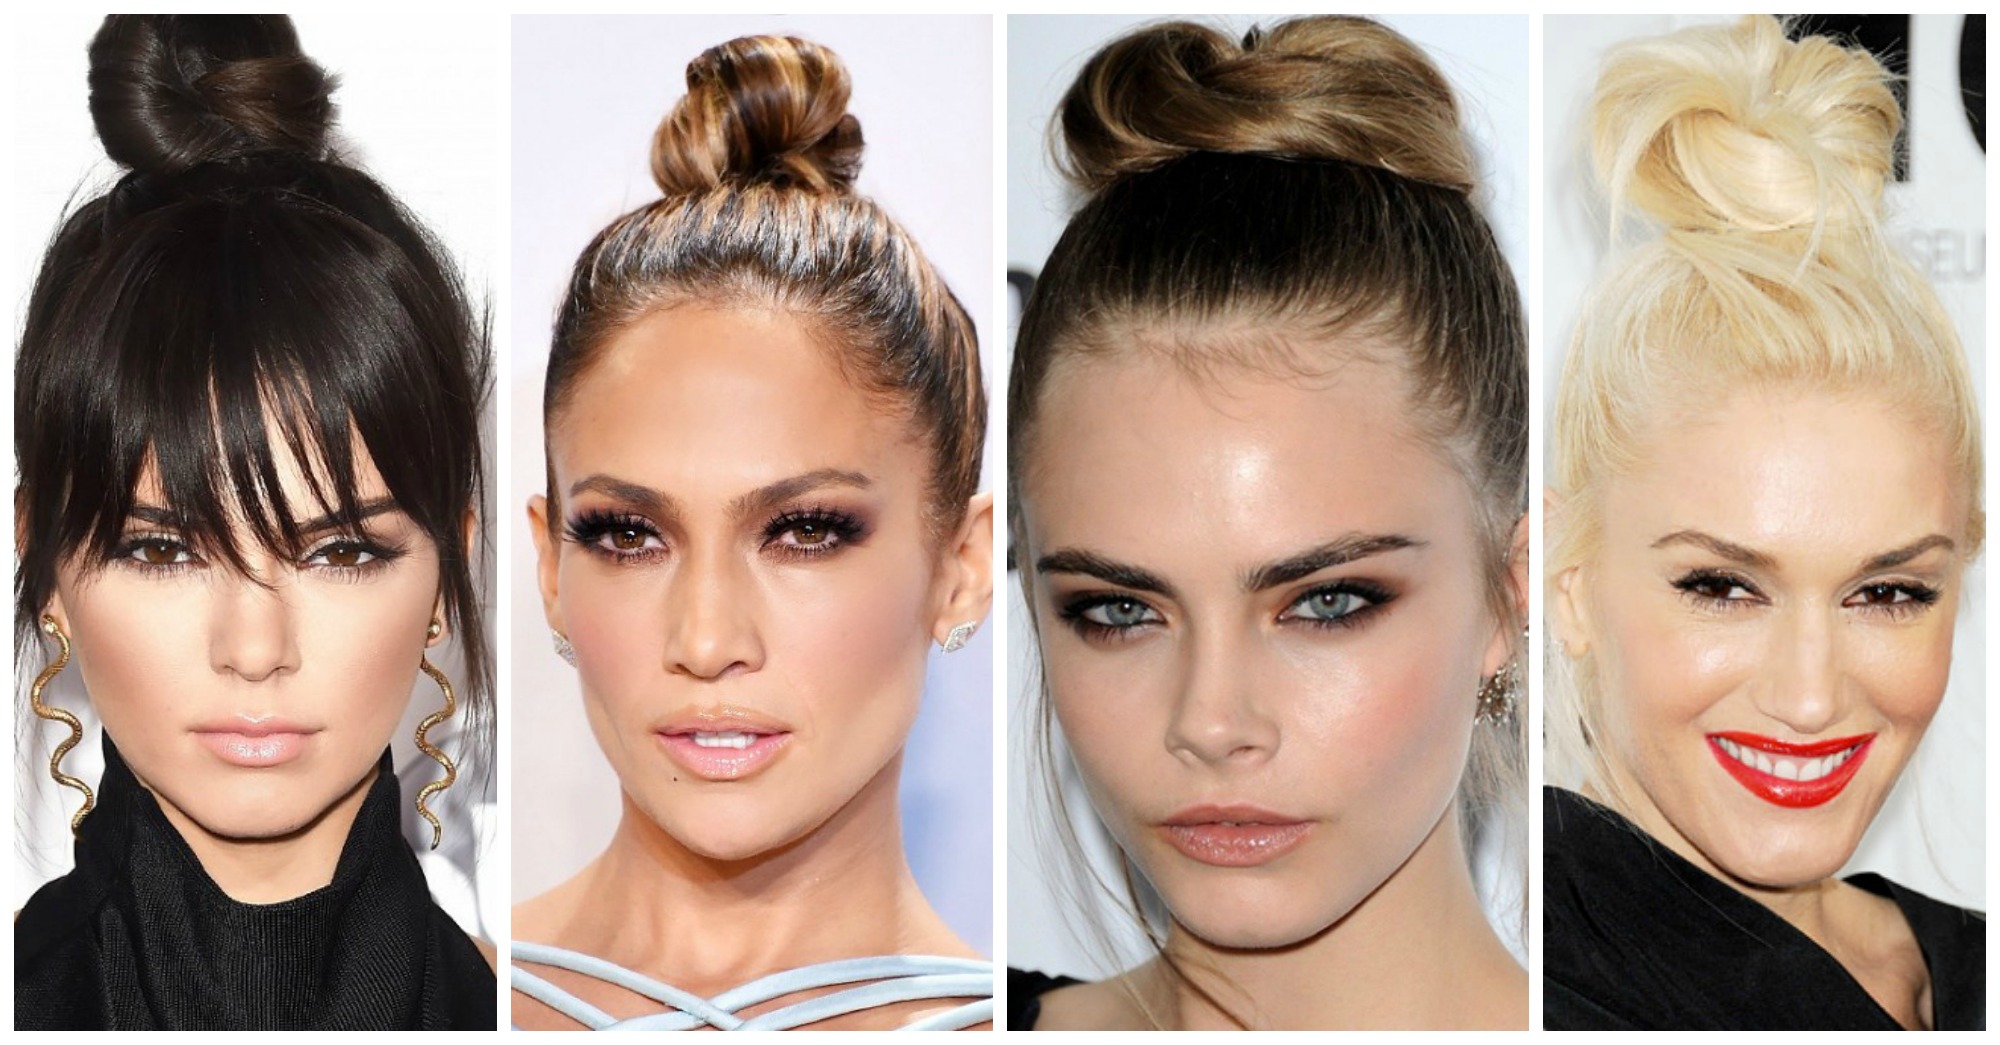 Celebrity Hairstyles: The Top Knot is IN